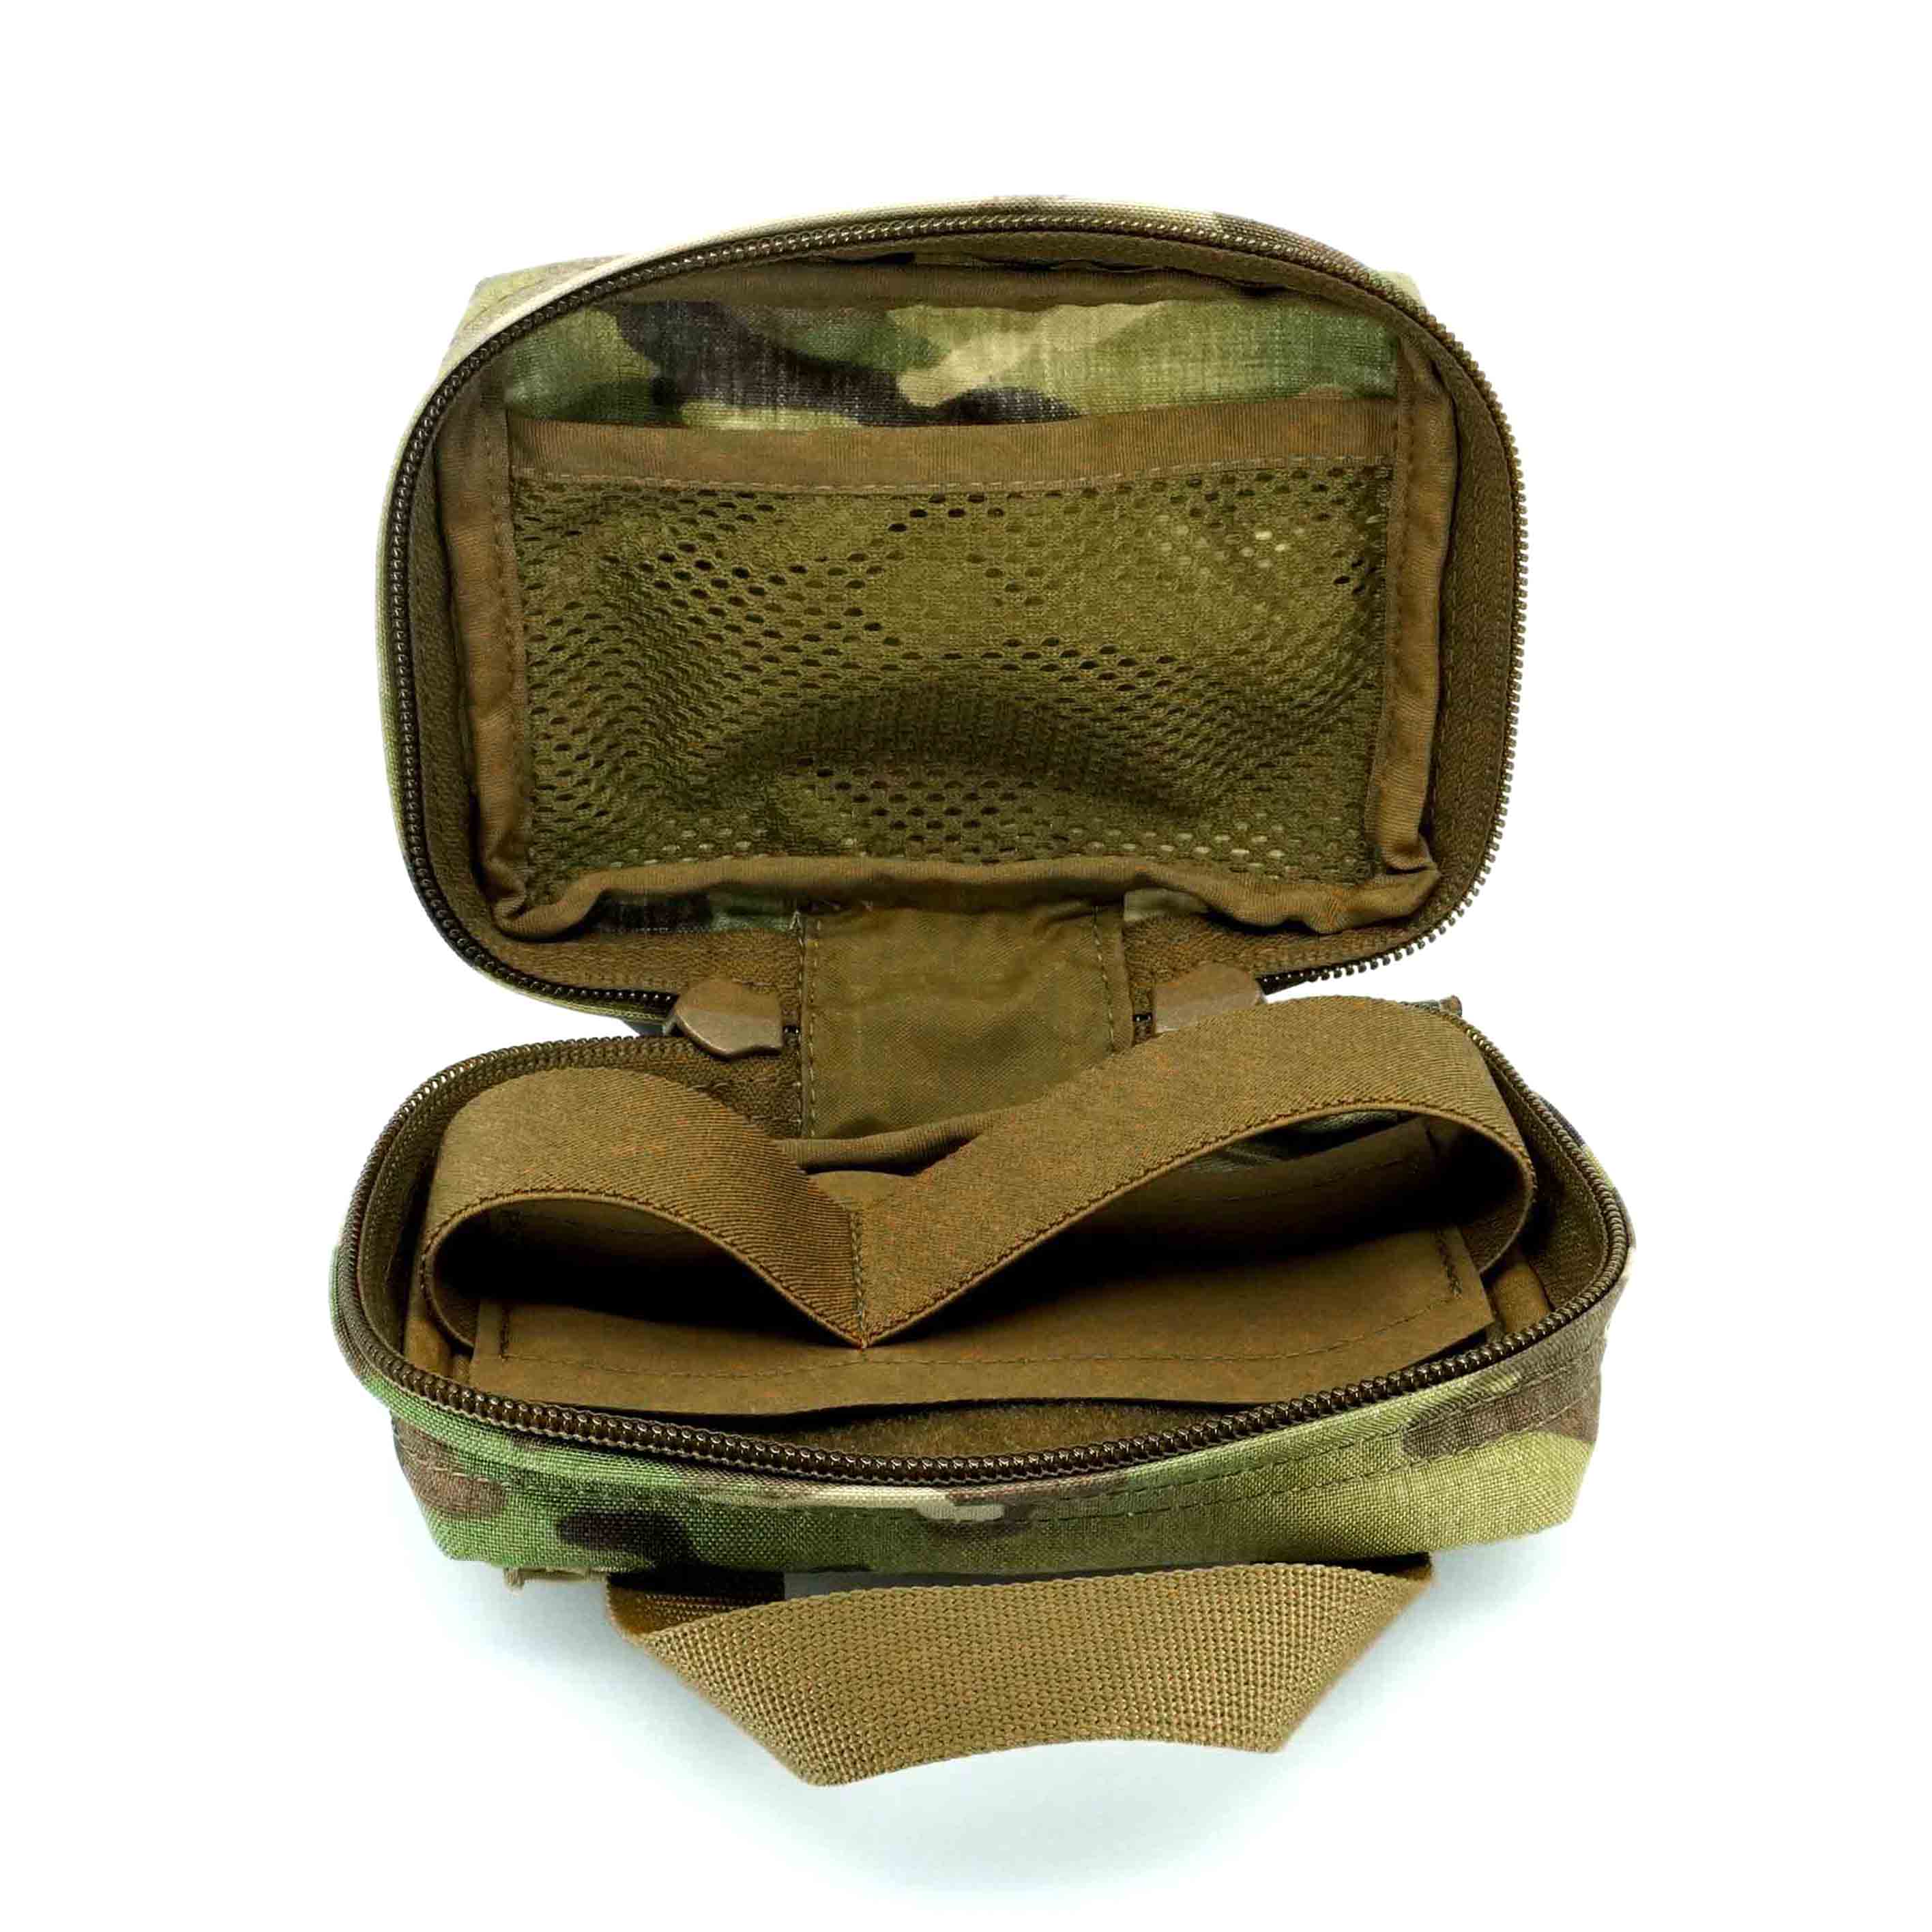 IFAK Medical Pouch with QD Holder